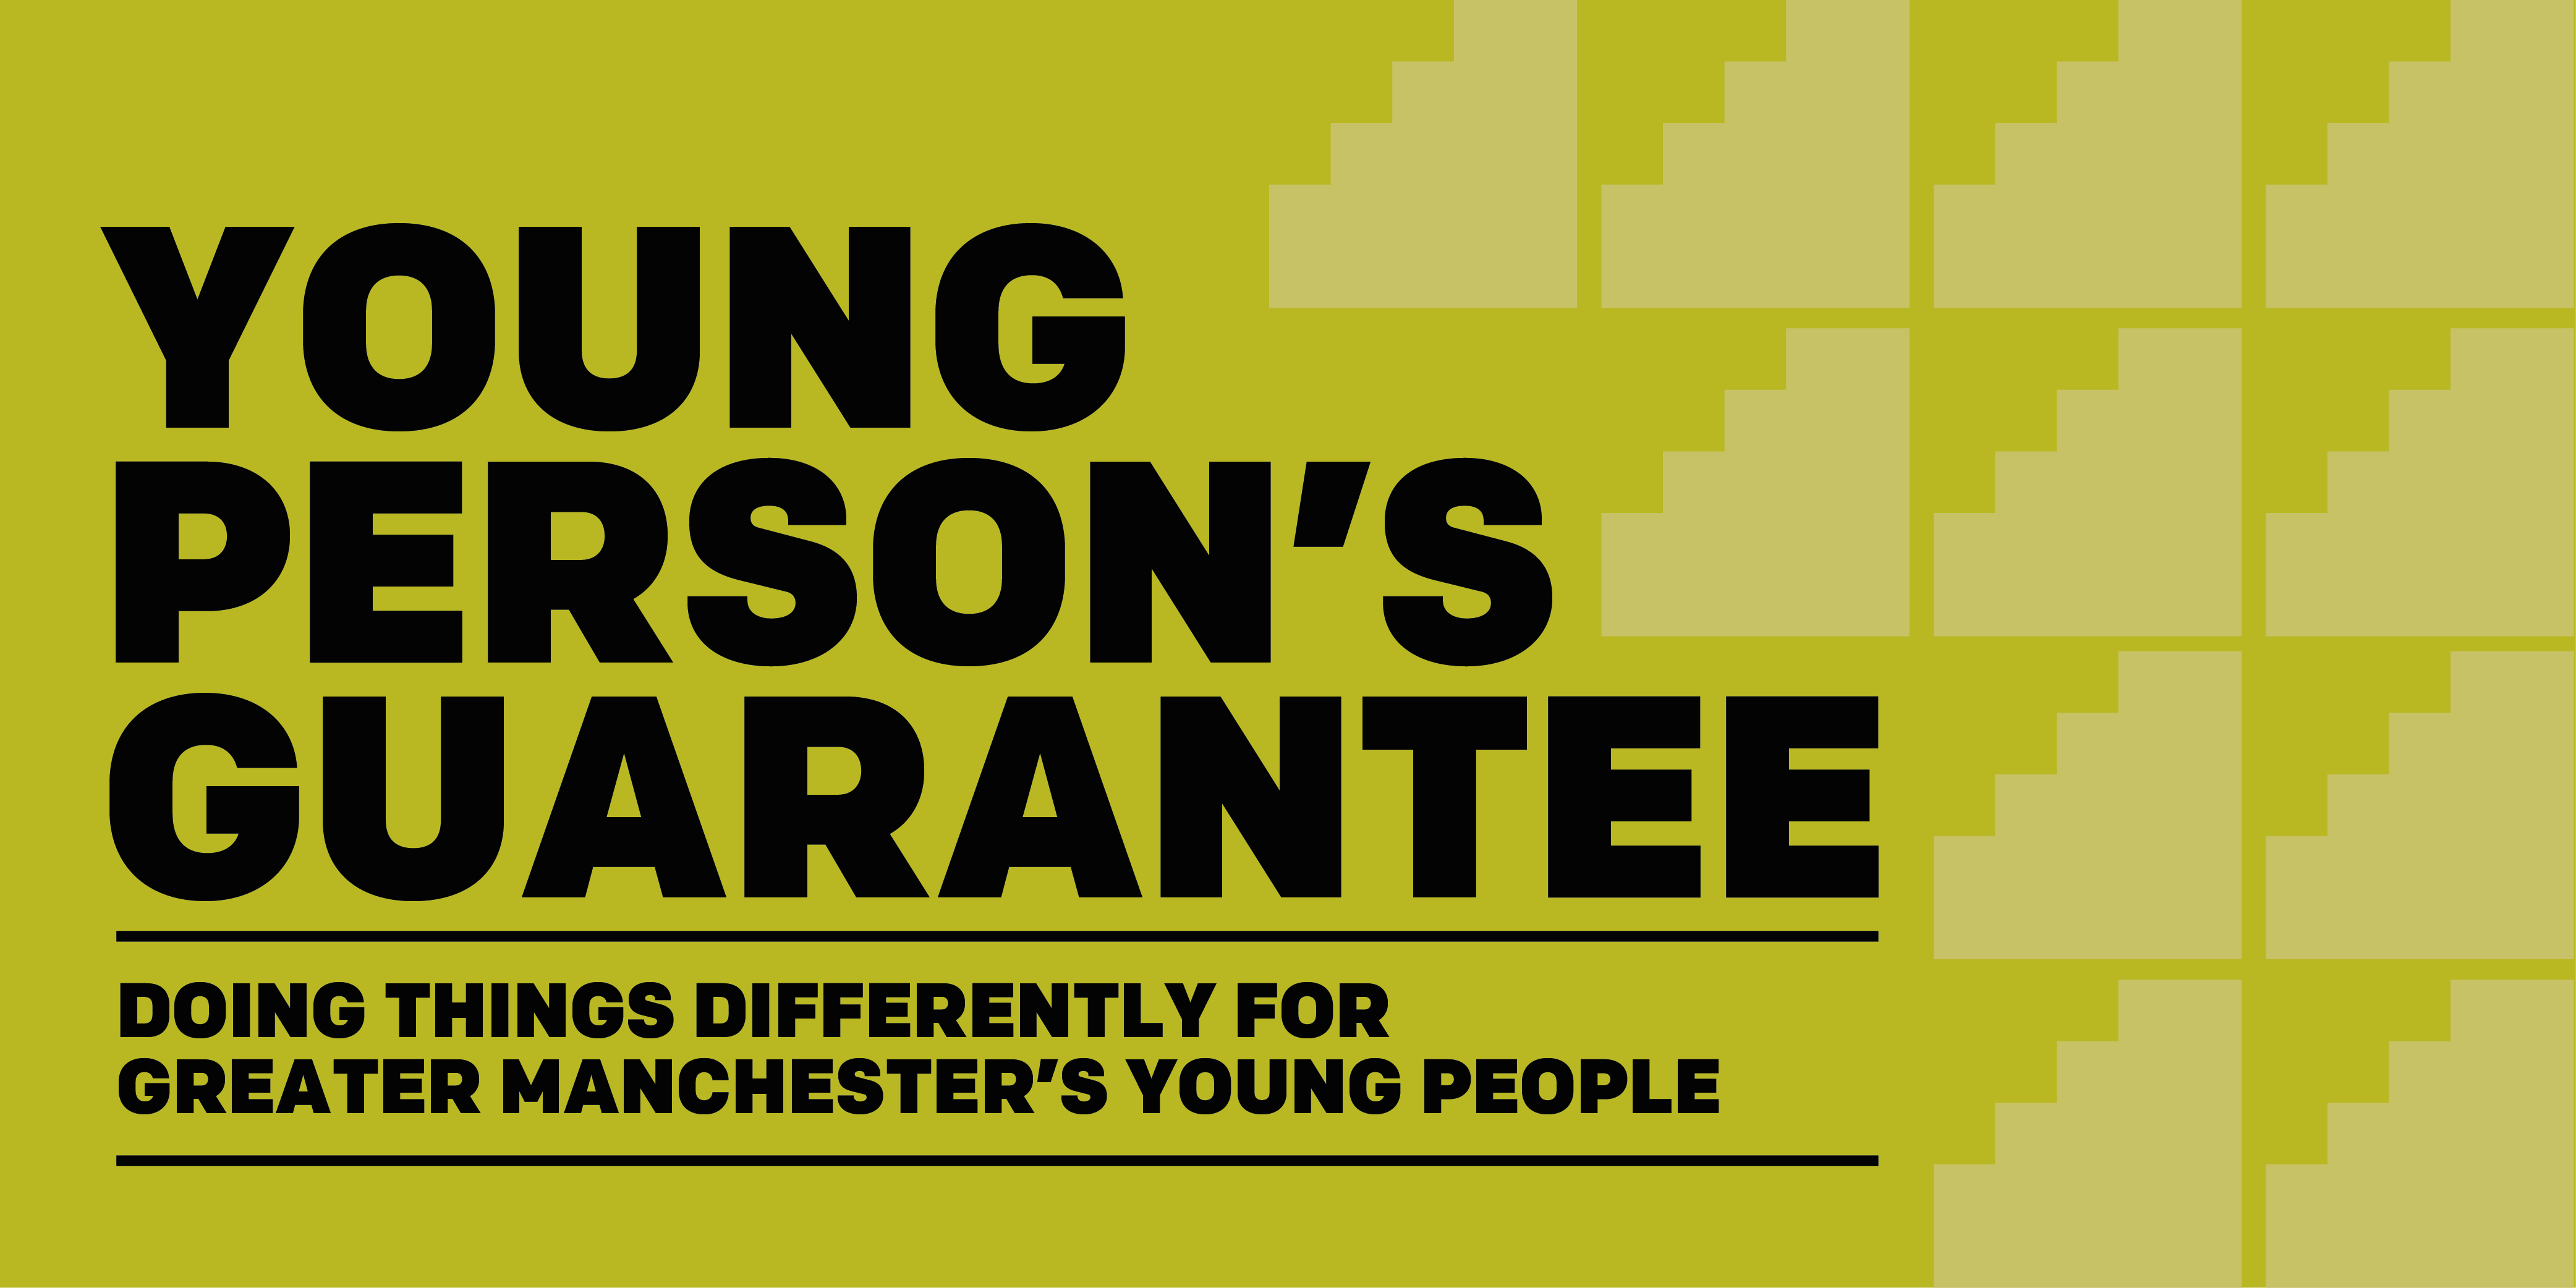 'Young Person's Guarantee', 'Doing things differently for Greater Manchester's young people'